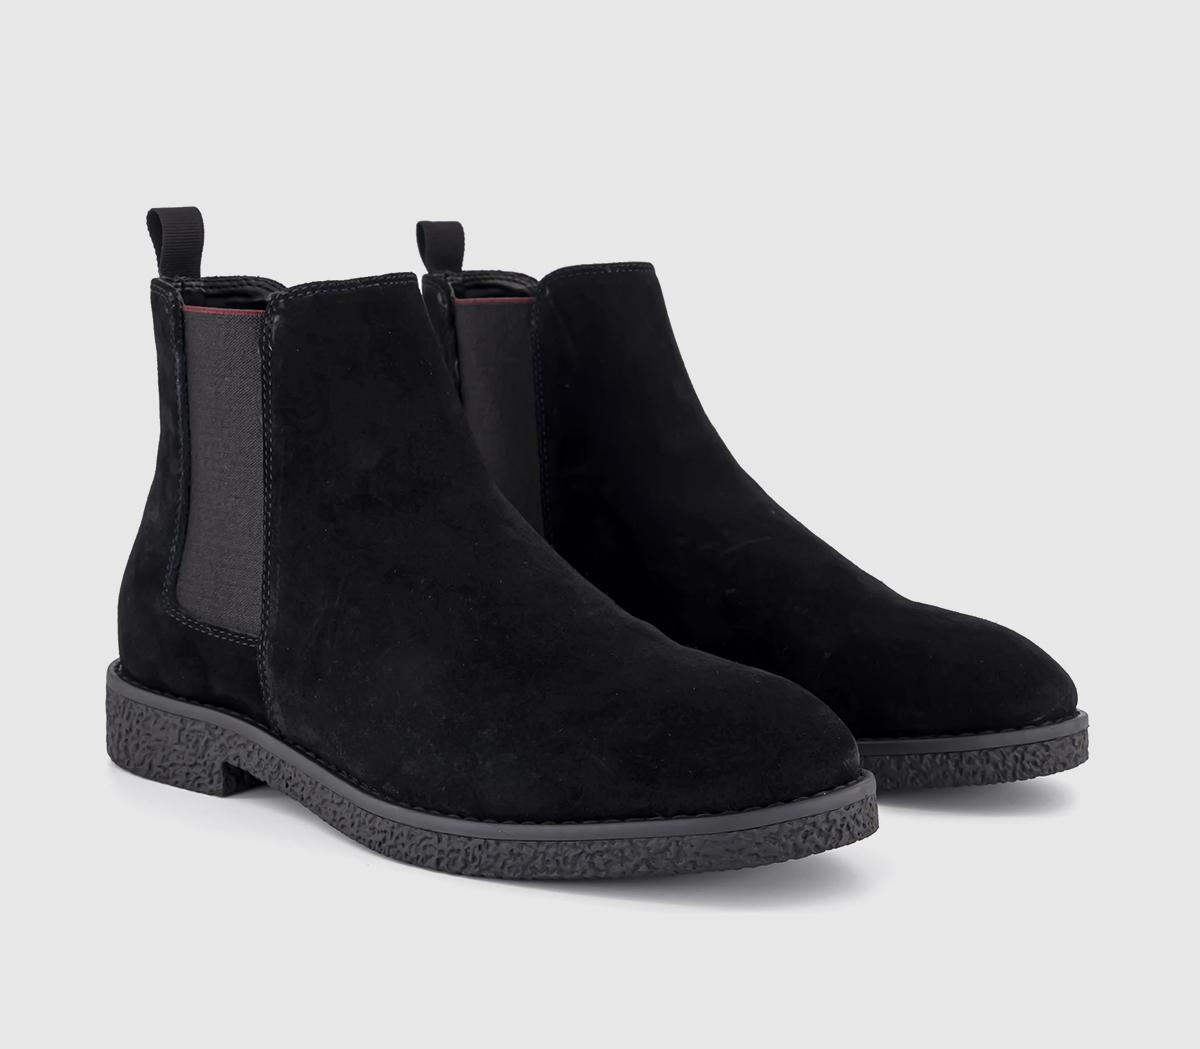 OFFICE Mens Bachelor Crepe Look Chelsea Boots Black Suede, 11